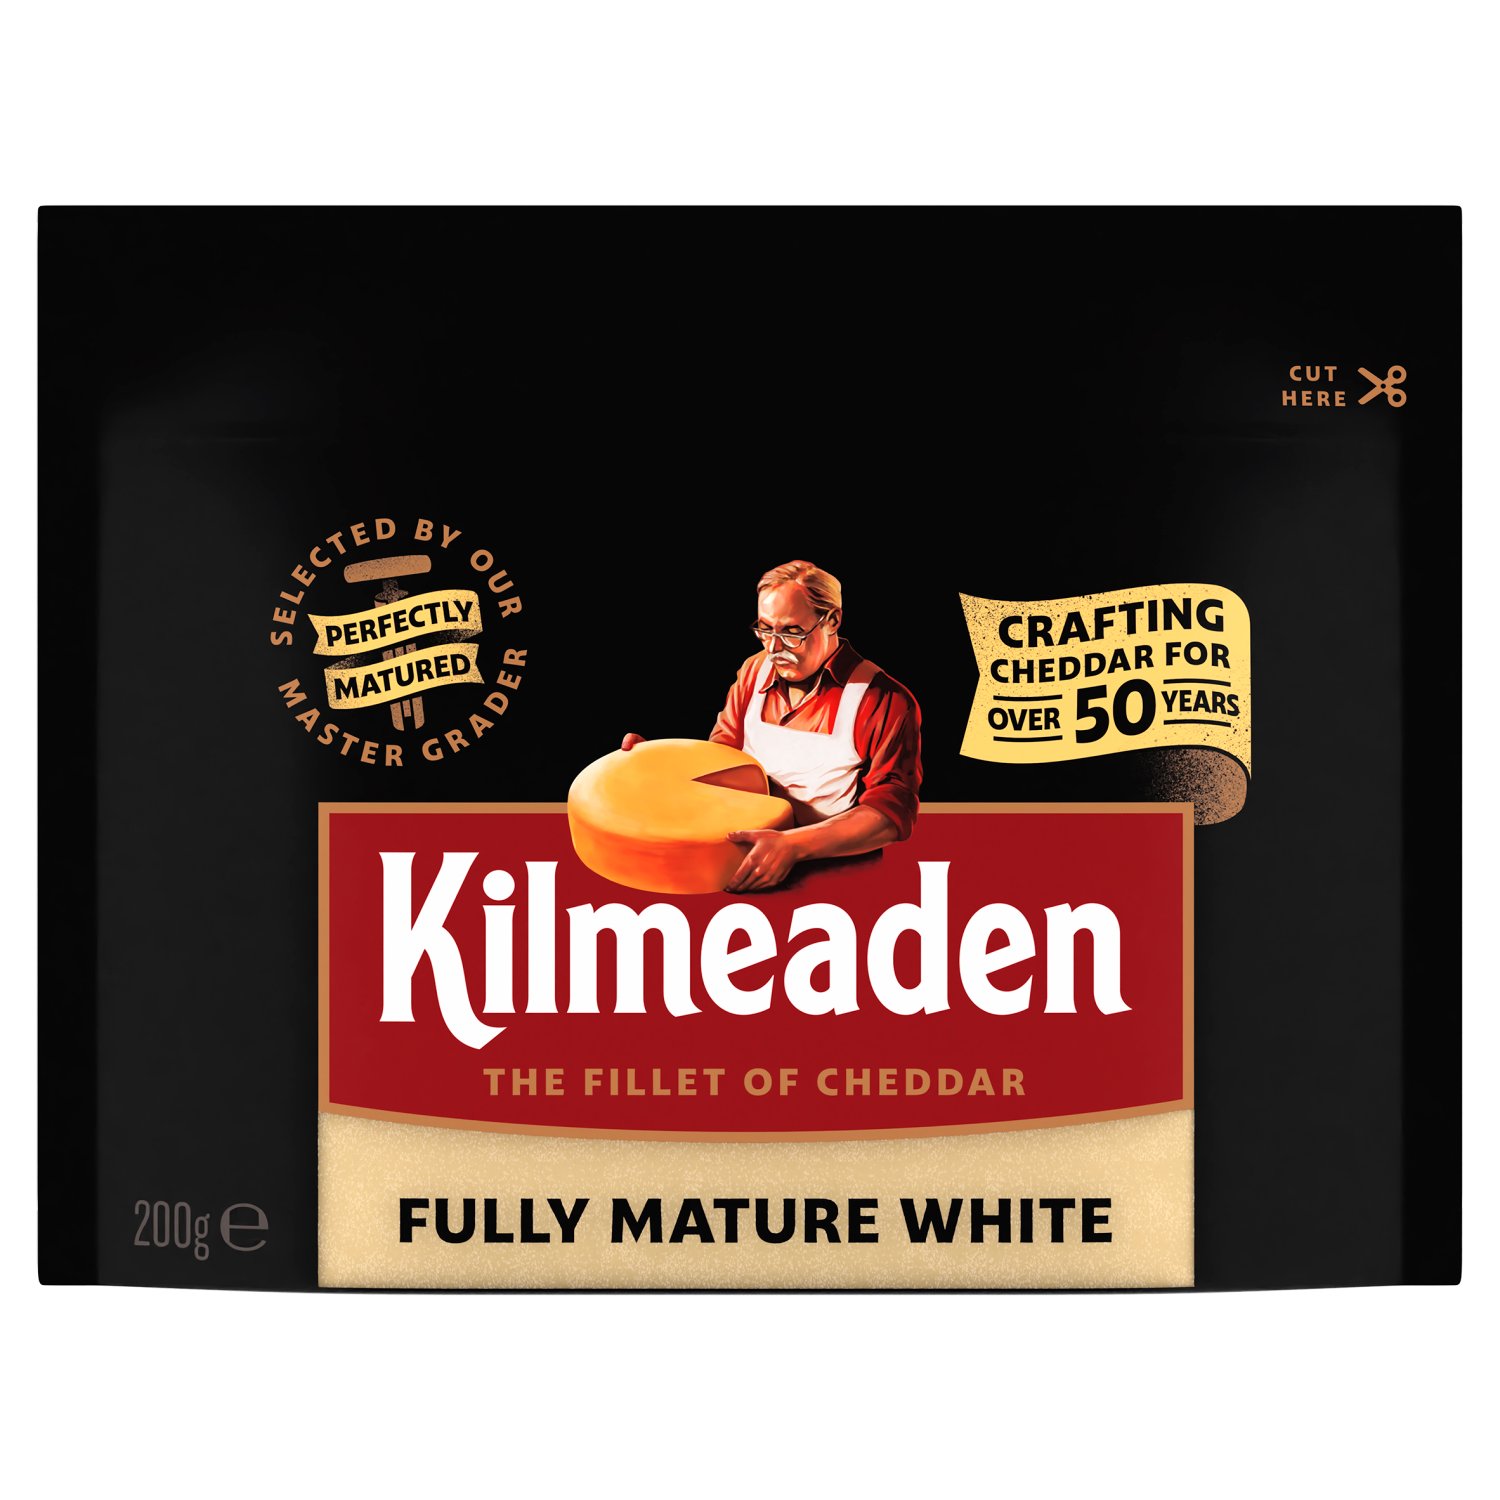 Fully mature white cheddar with a crumbly texture and a nutty, uniquely delicious flavor